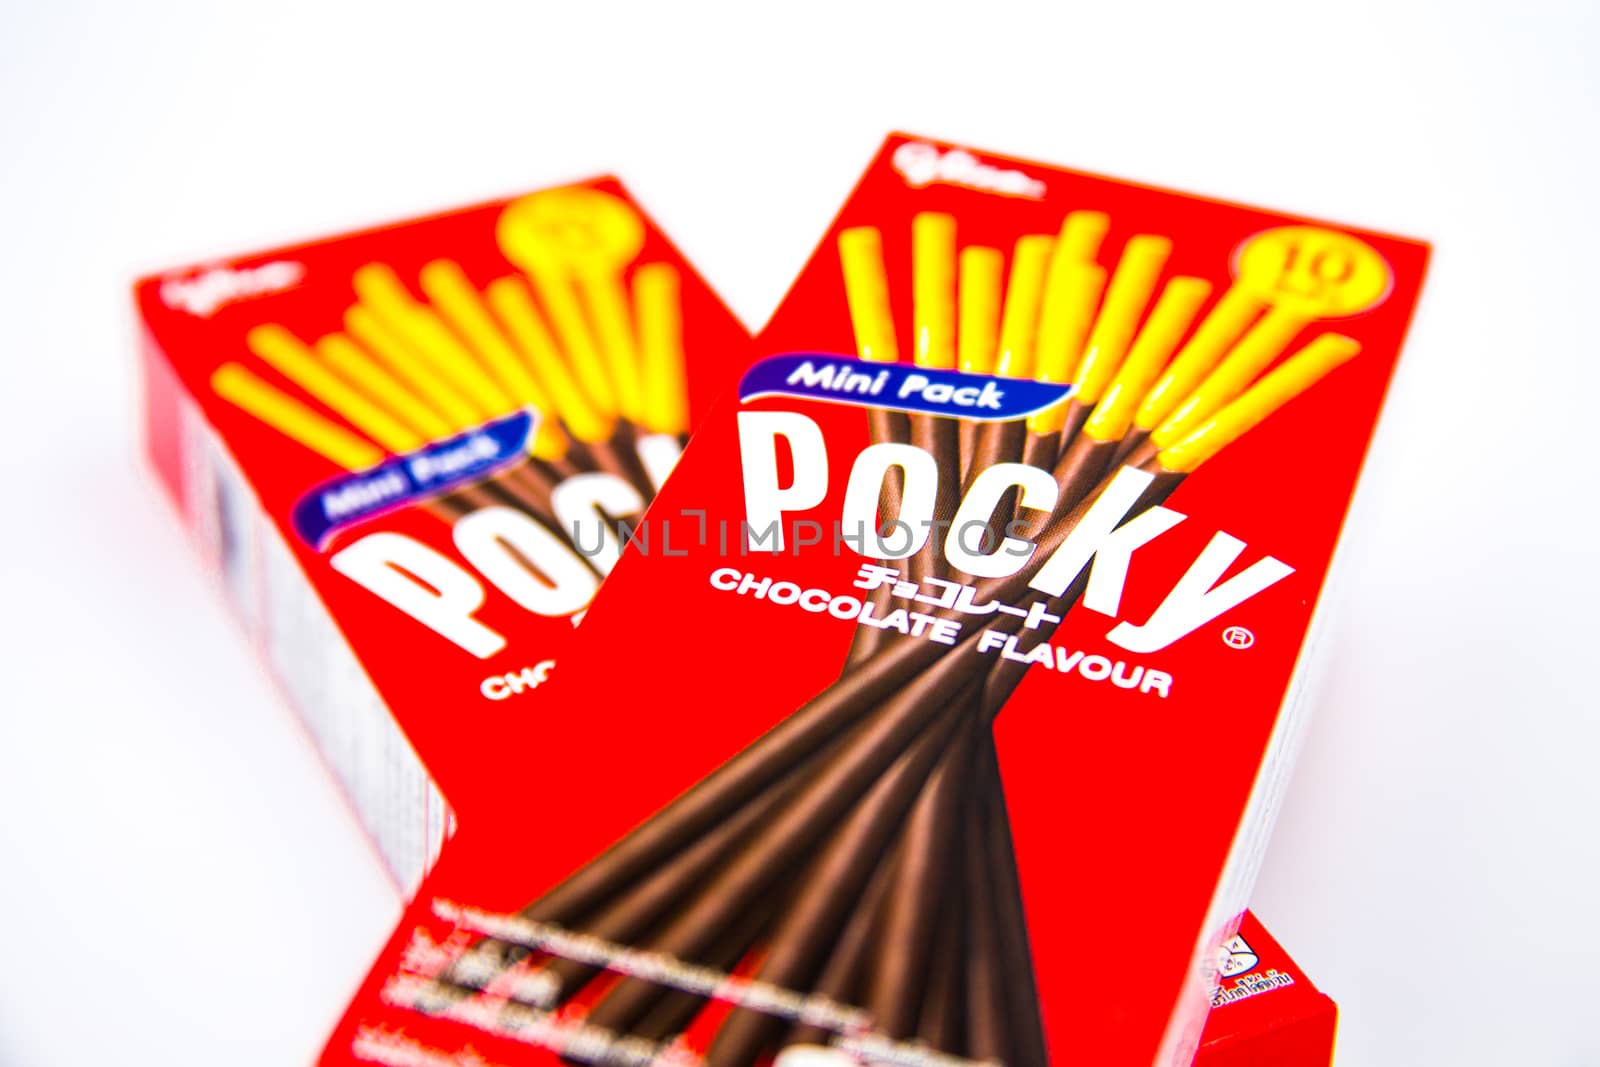 The mini Pocky. by vorawoot_kakanumporn